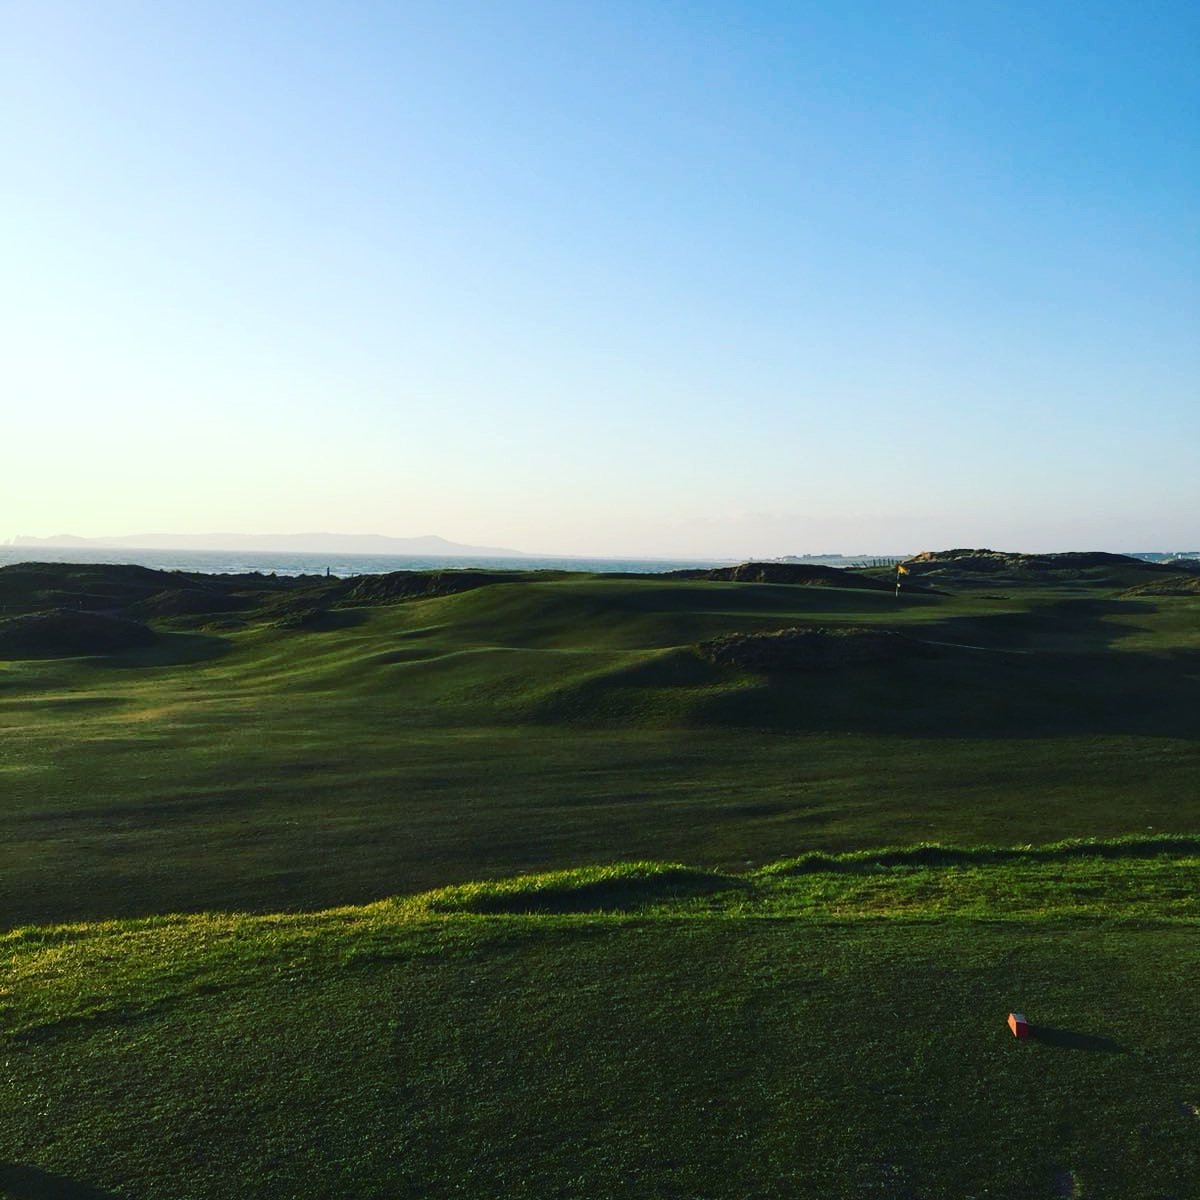 We are back open again morning. Dust of the club's and join us for the Open Singles Monday event. #golf #links #beastfromtheeast #springiscomingsoon